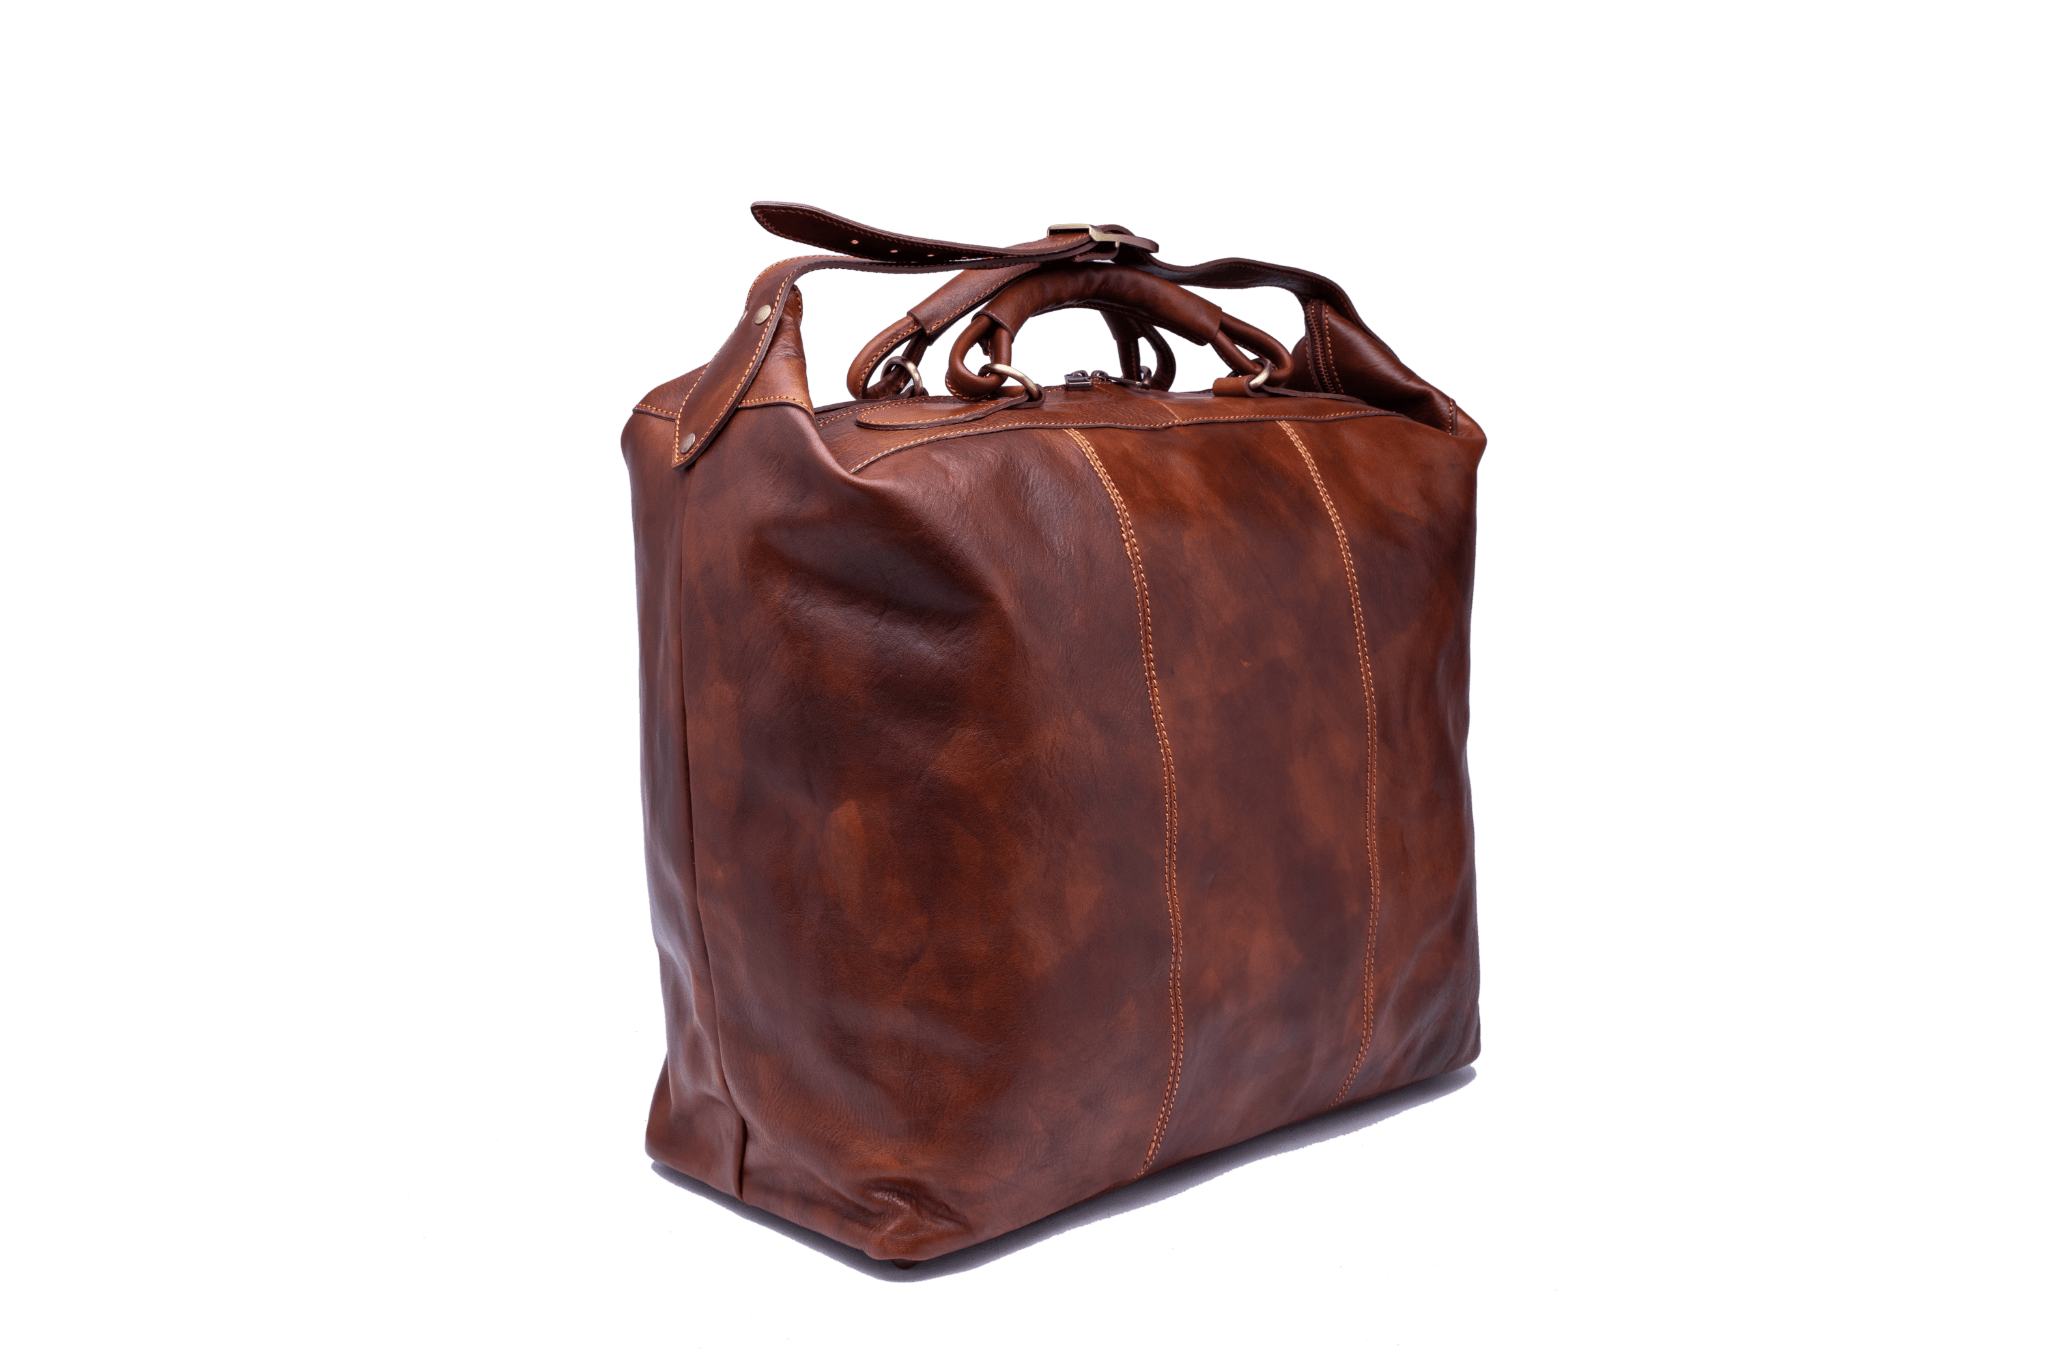 Travel bag 100% made in italy vegetable tanned hand dyed leather